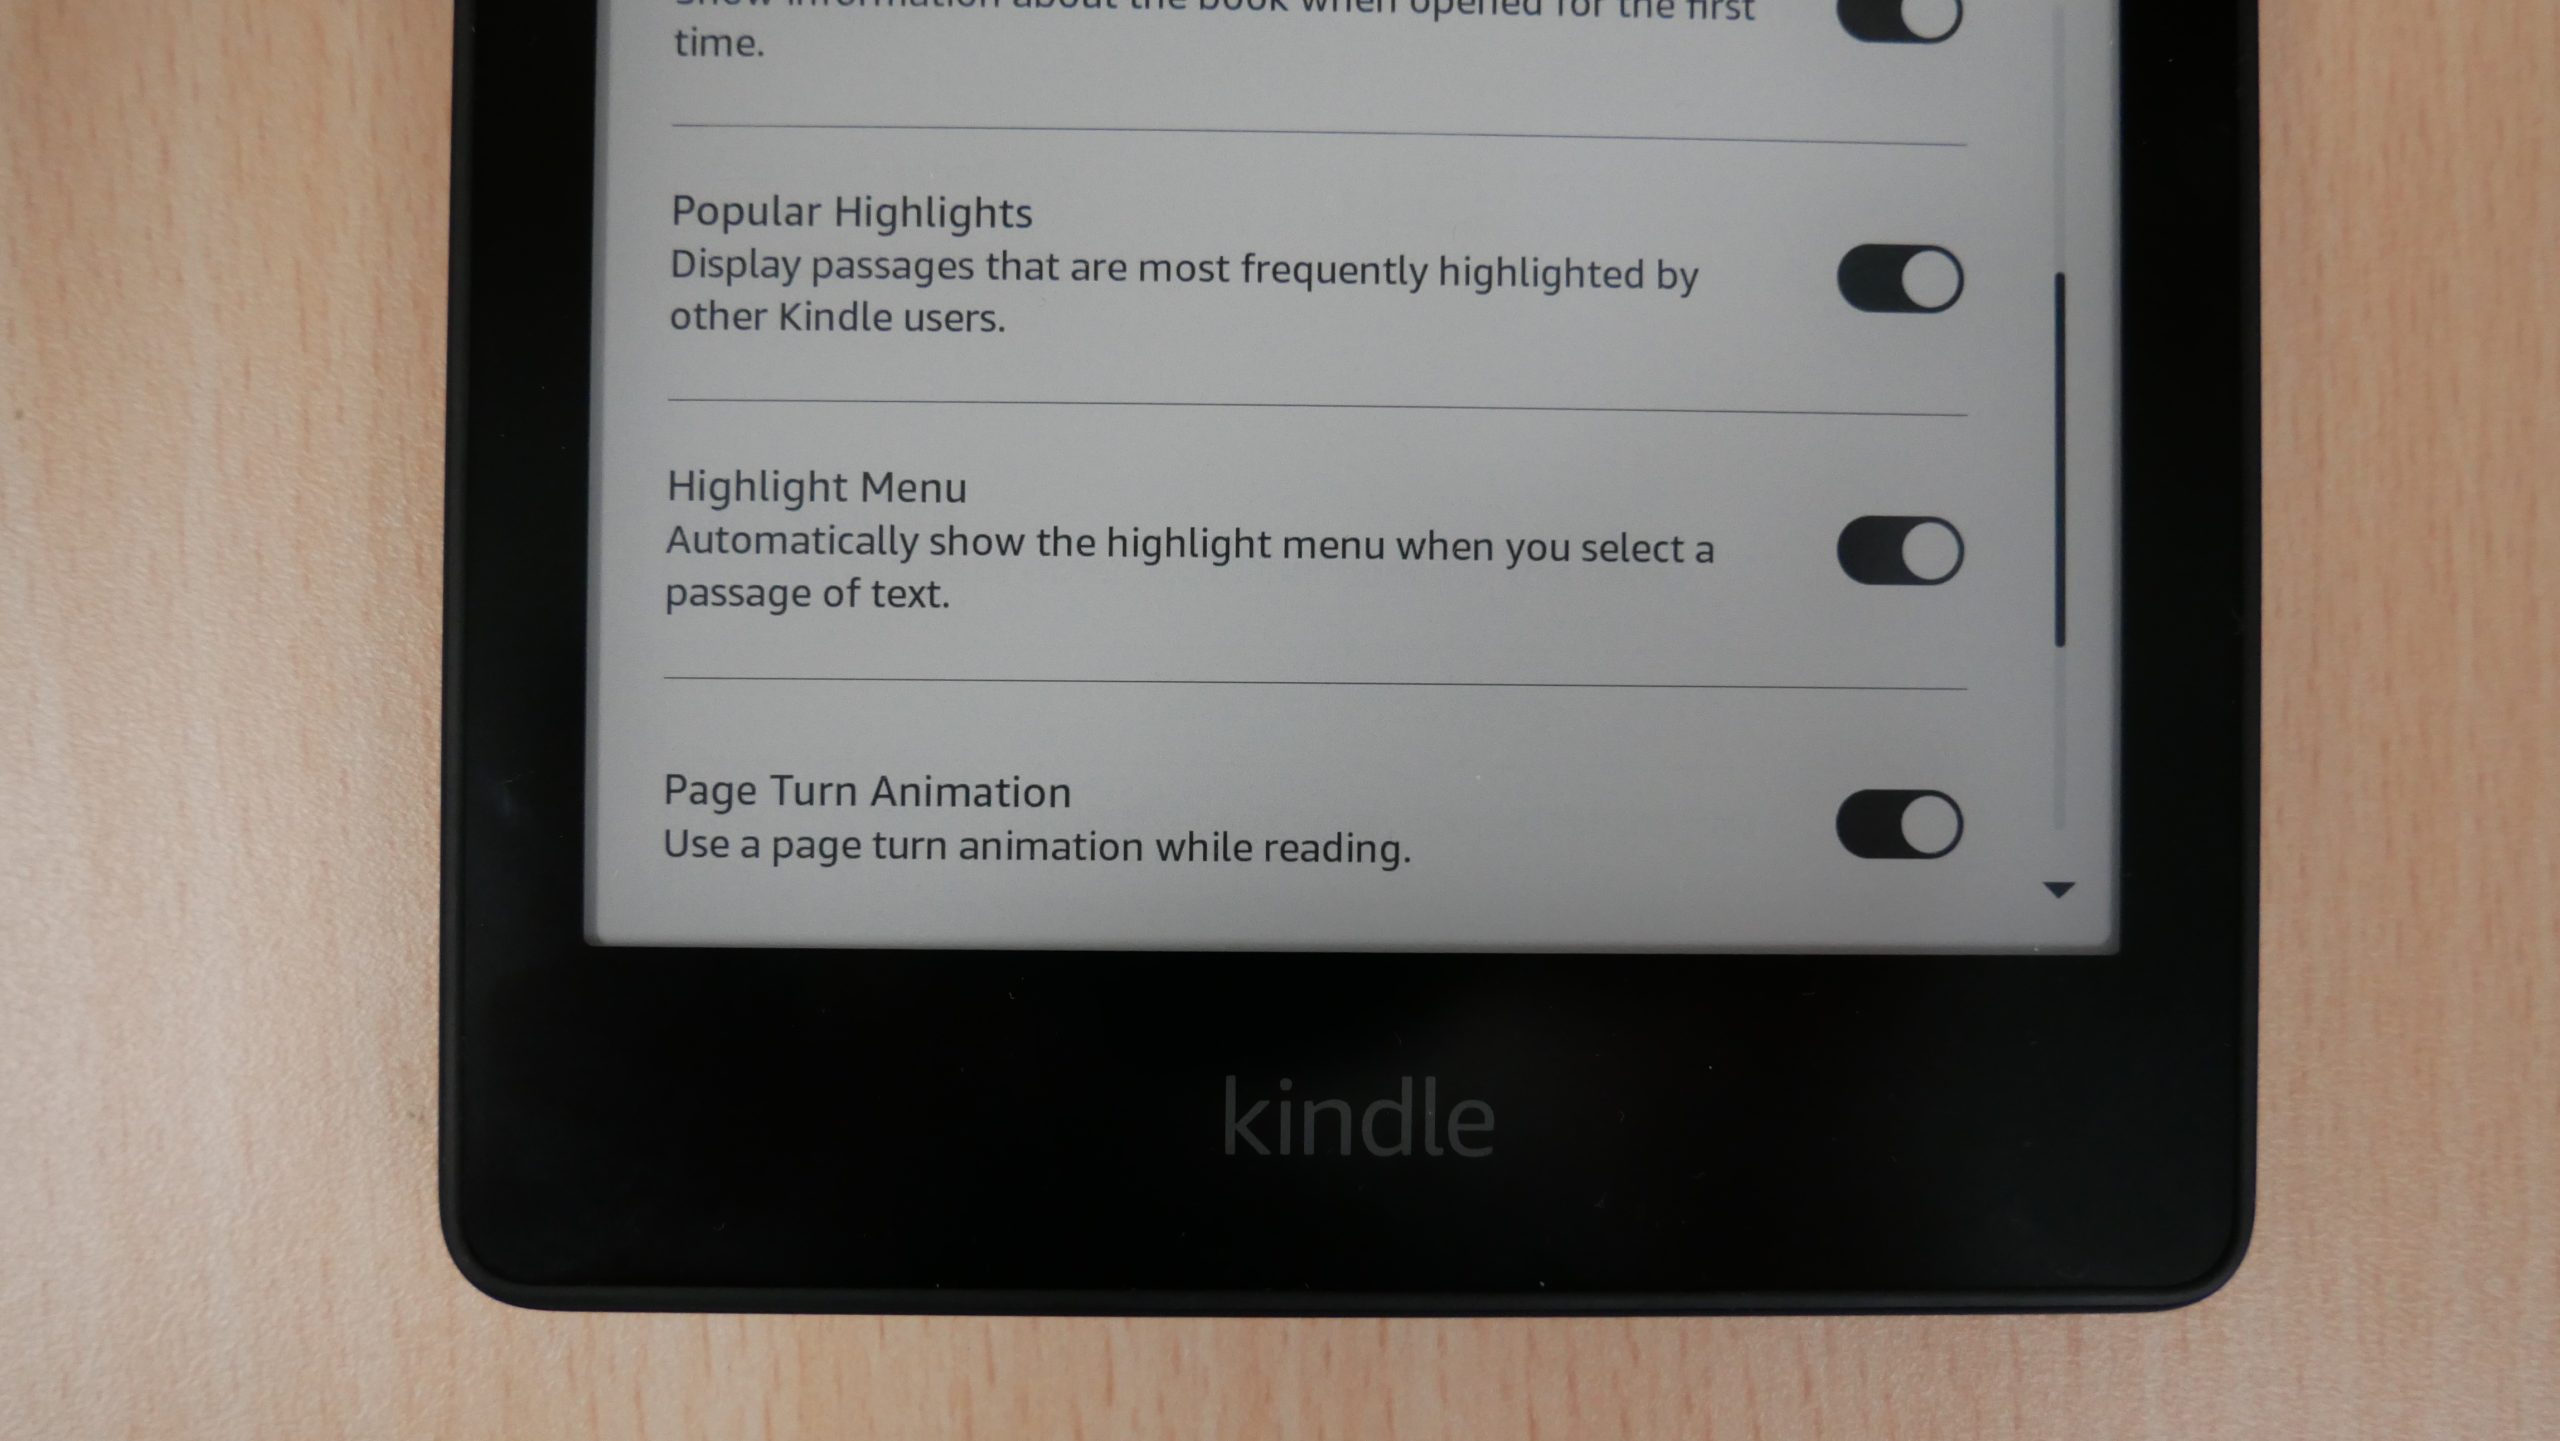 Kindle Paperwhite Signature Edition review: For the reader in you